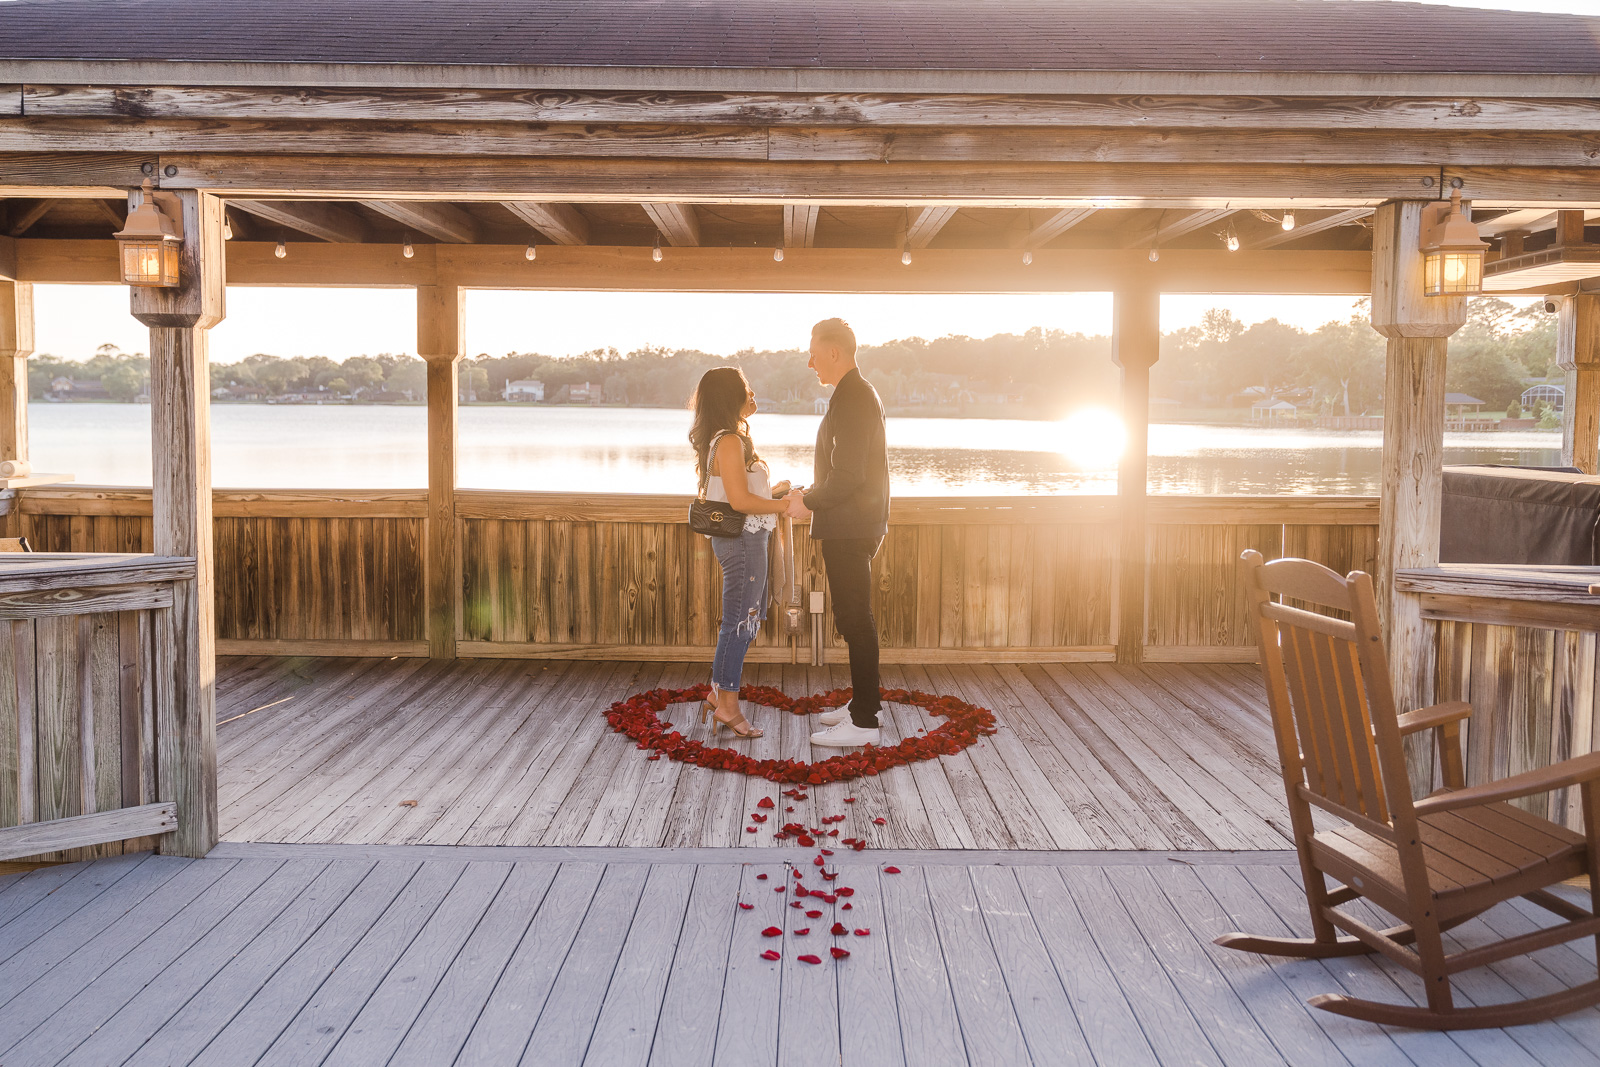 Location to propose in Orlando Florida with a surprise photographer